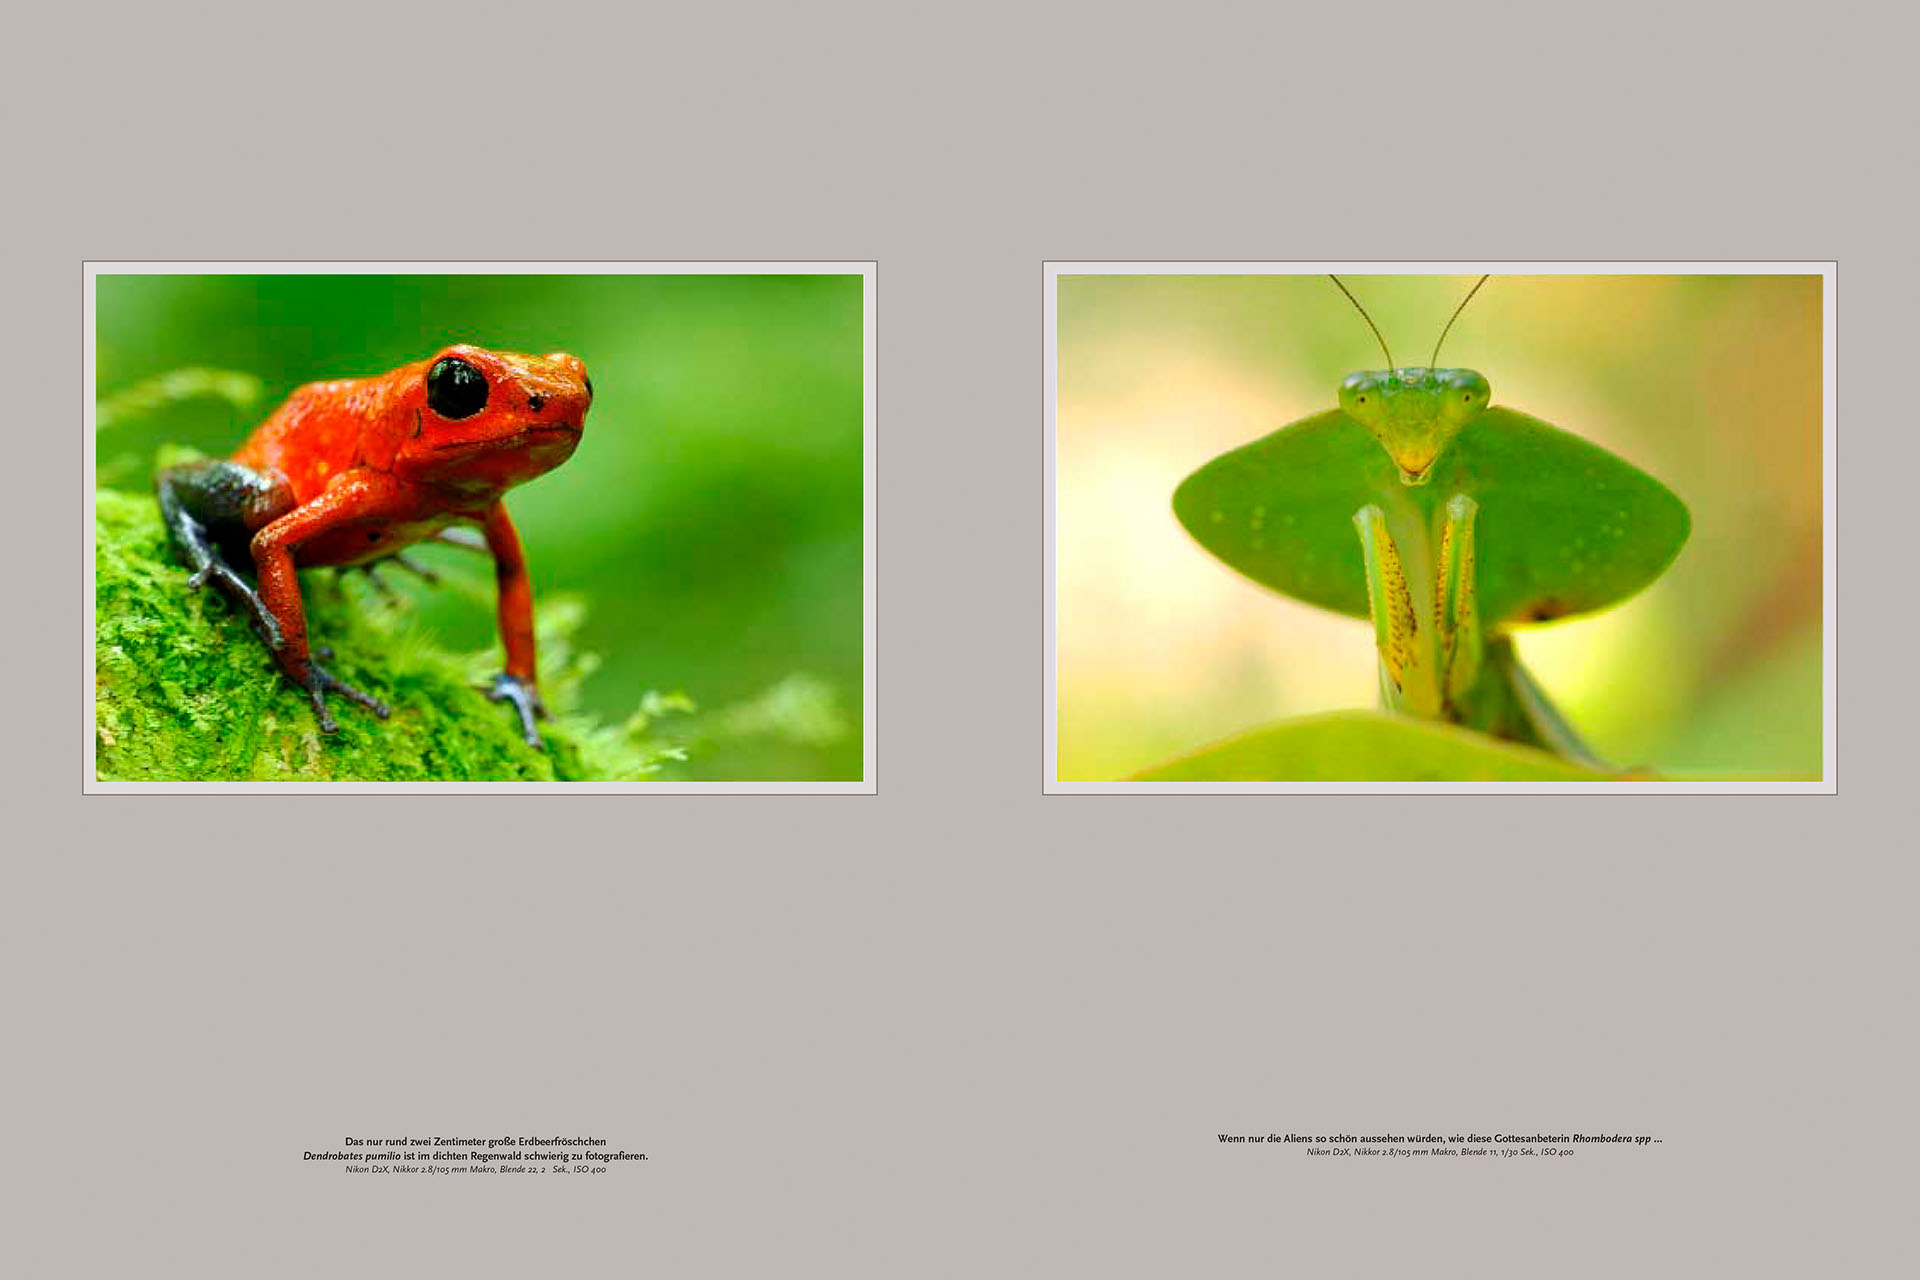 Ten pages of article about wildlife of Costa Rica in the German magazine NaturFoto.